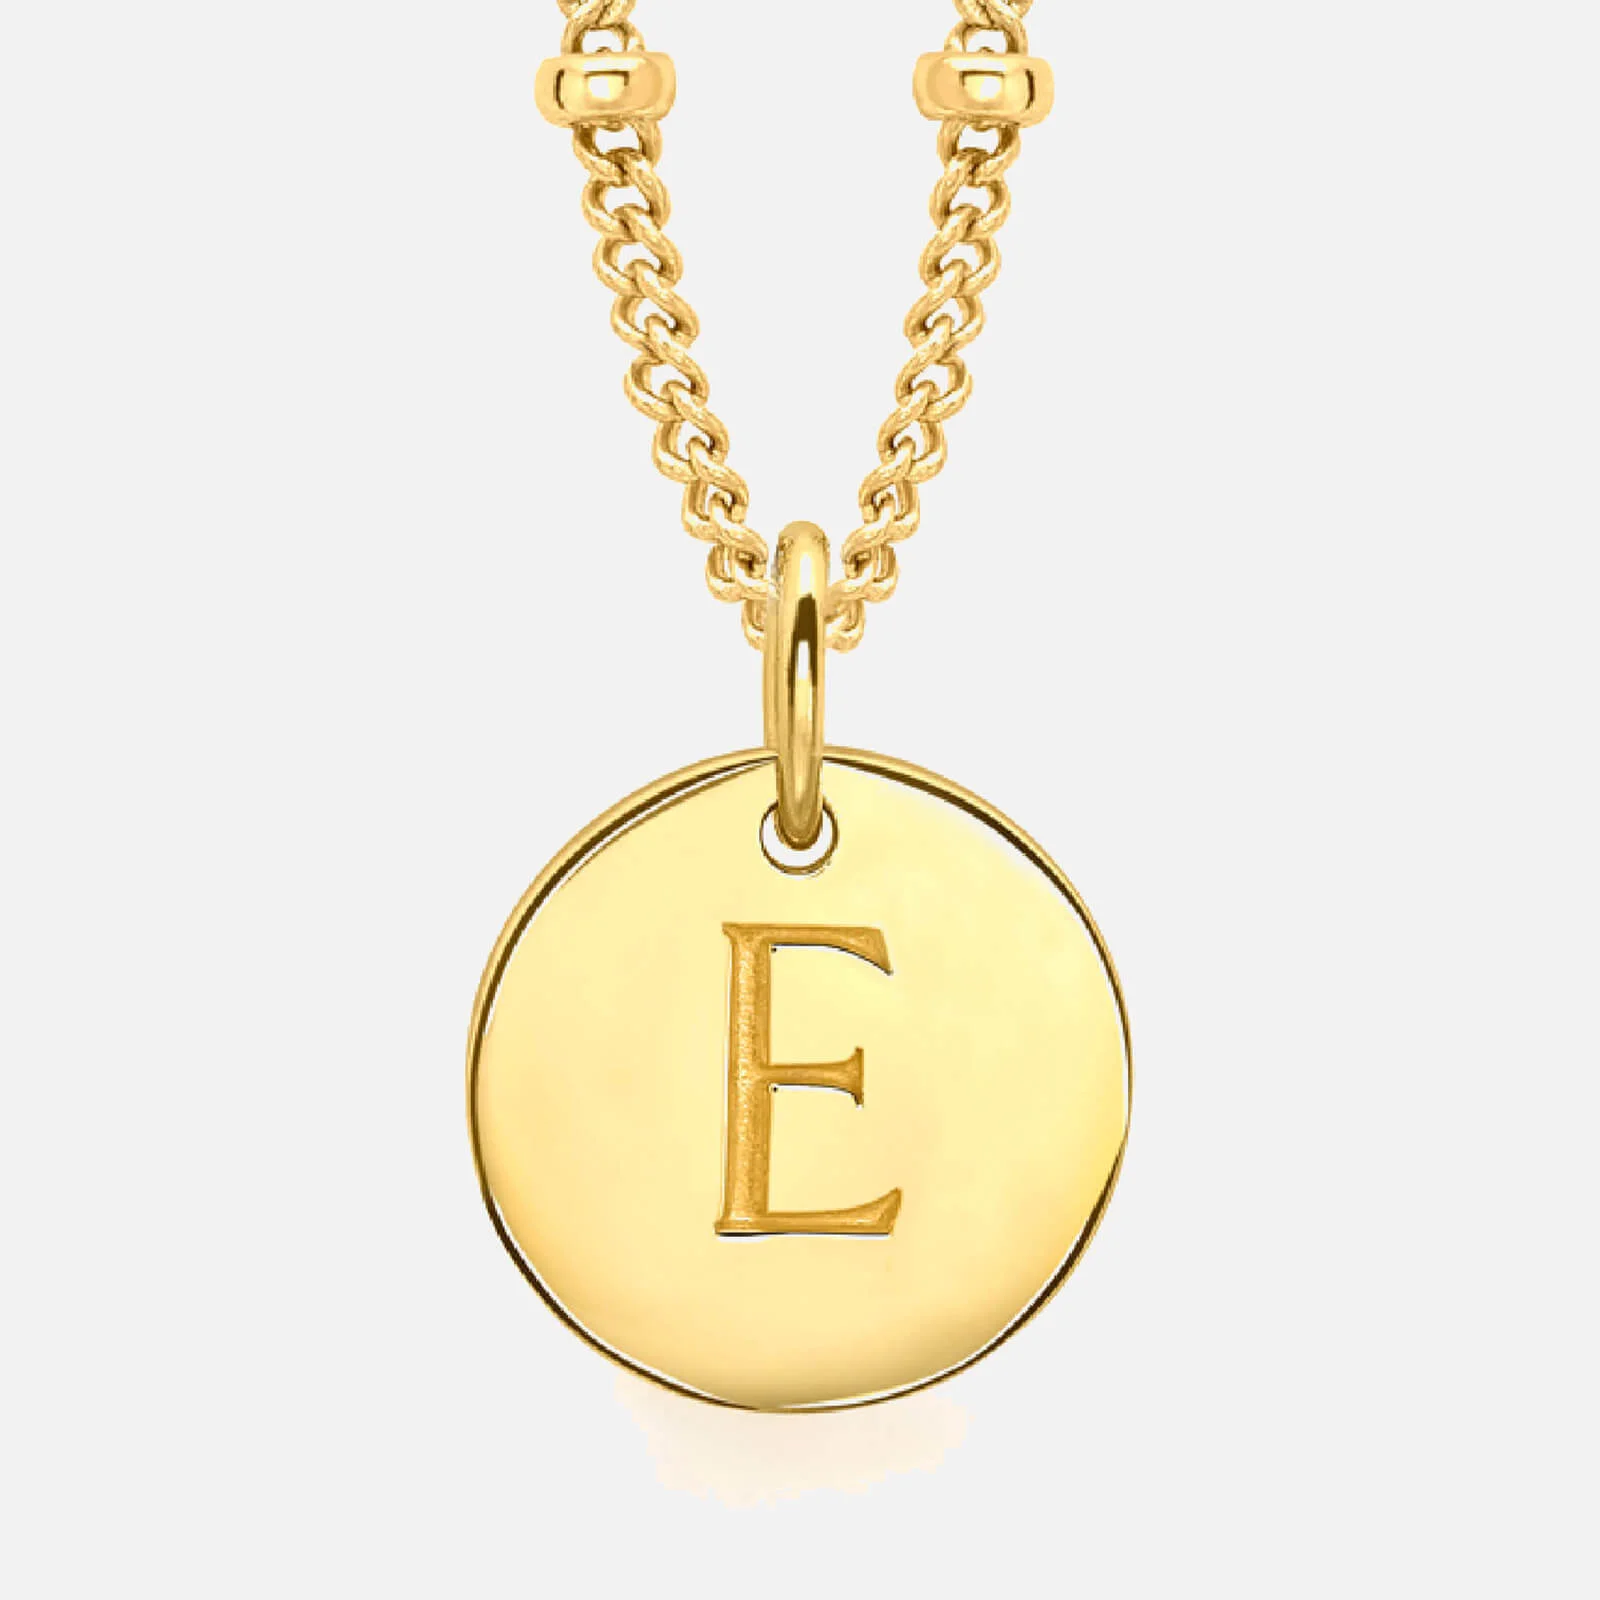 Missoma Women's Initial Charm Necklace - E - Gold Image 1